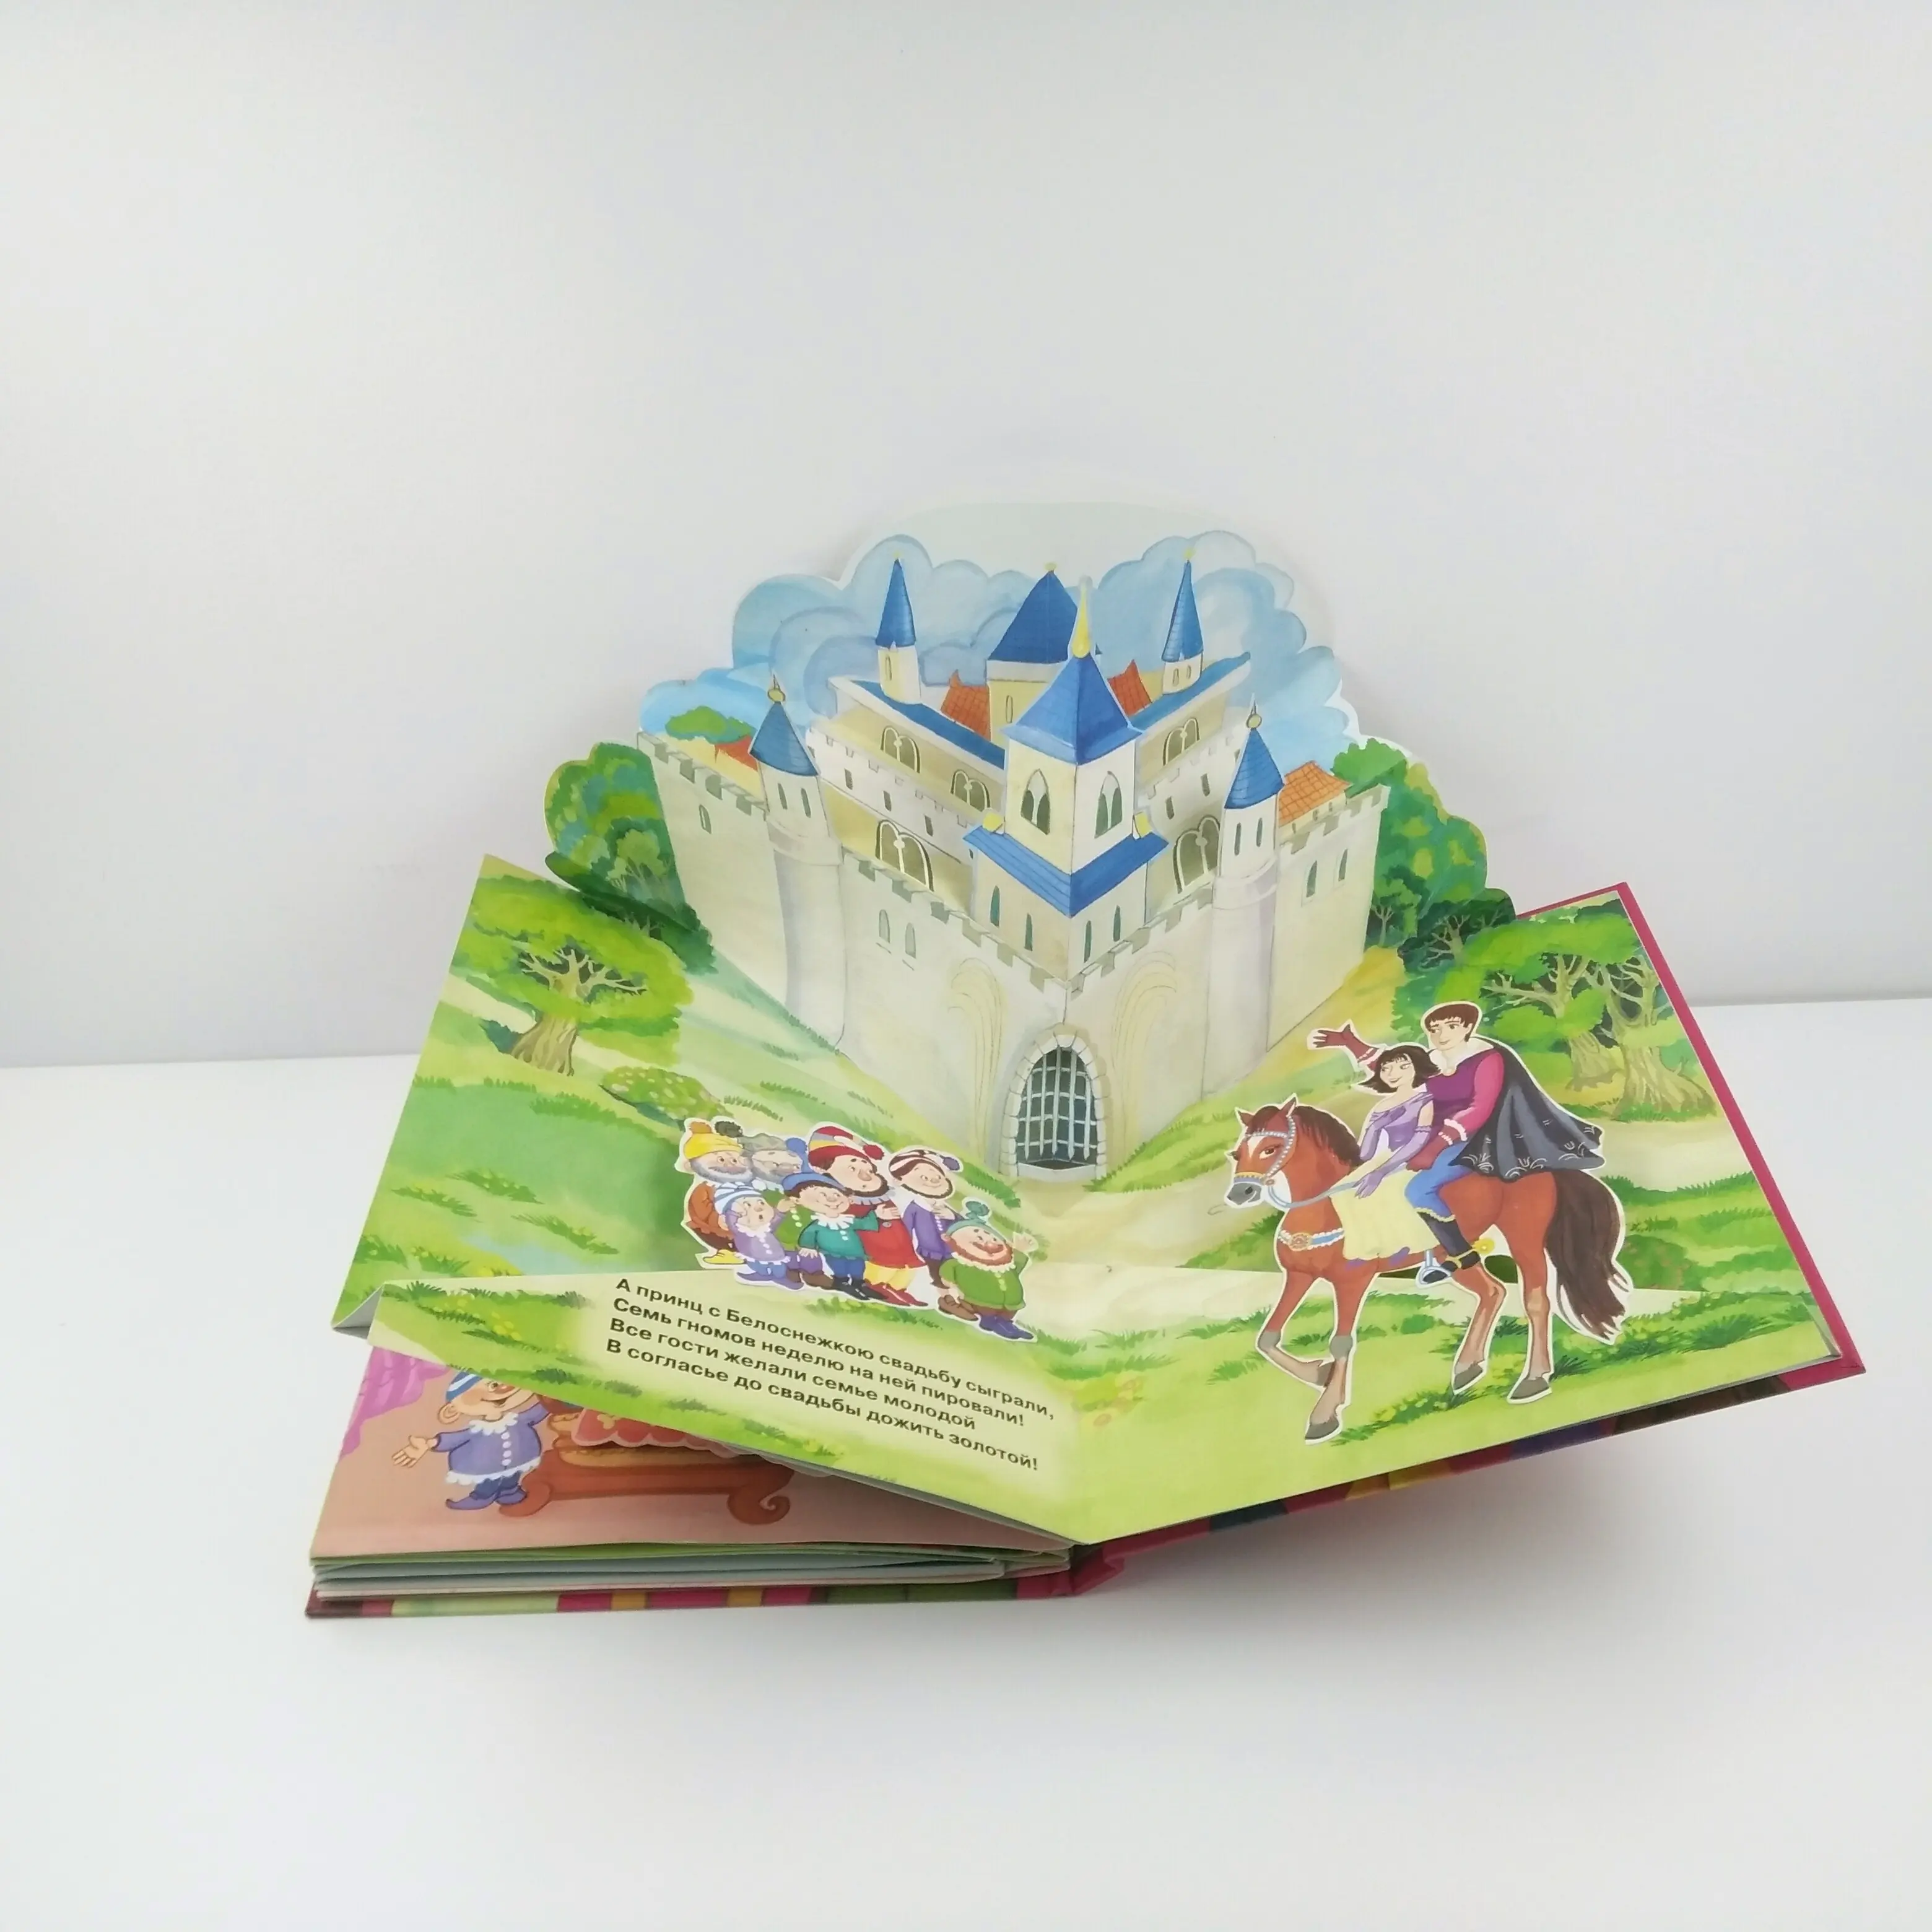 Educational 3D kids English story books customized pop up book printing service story books